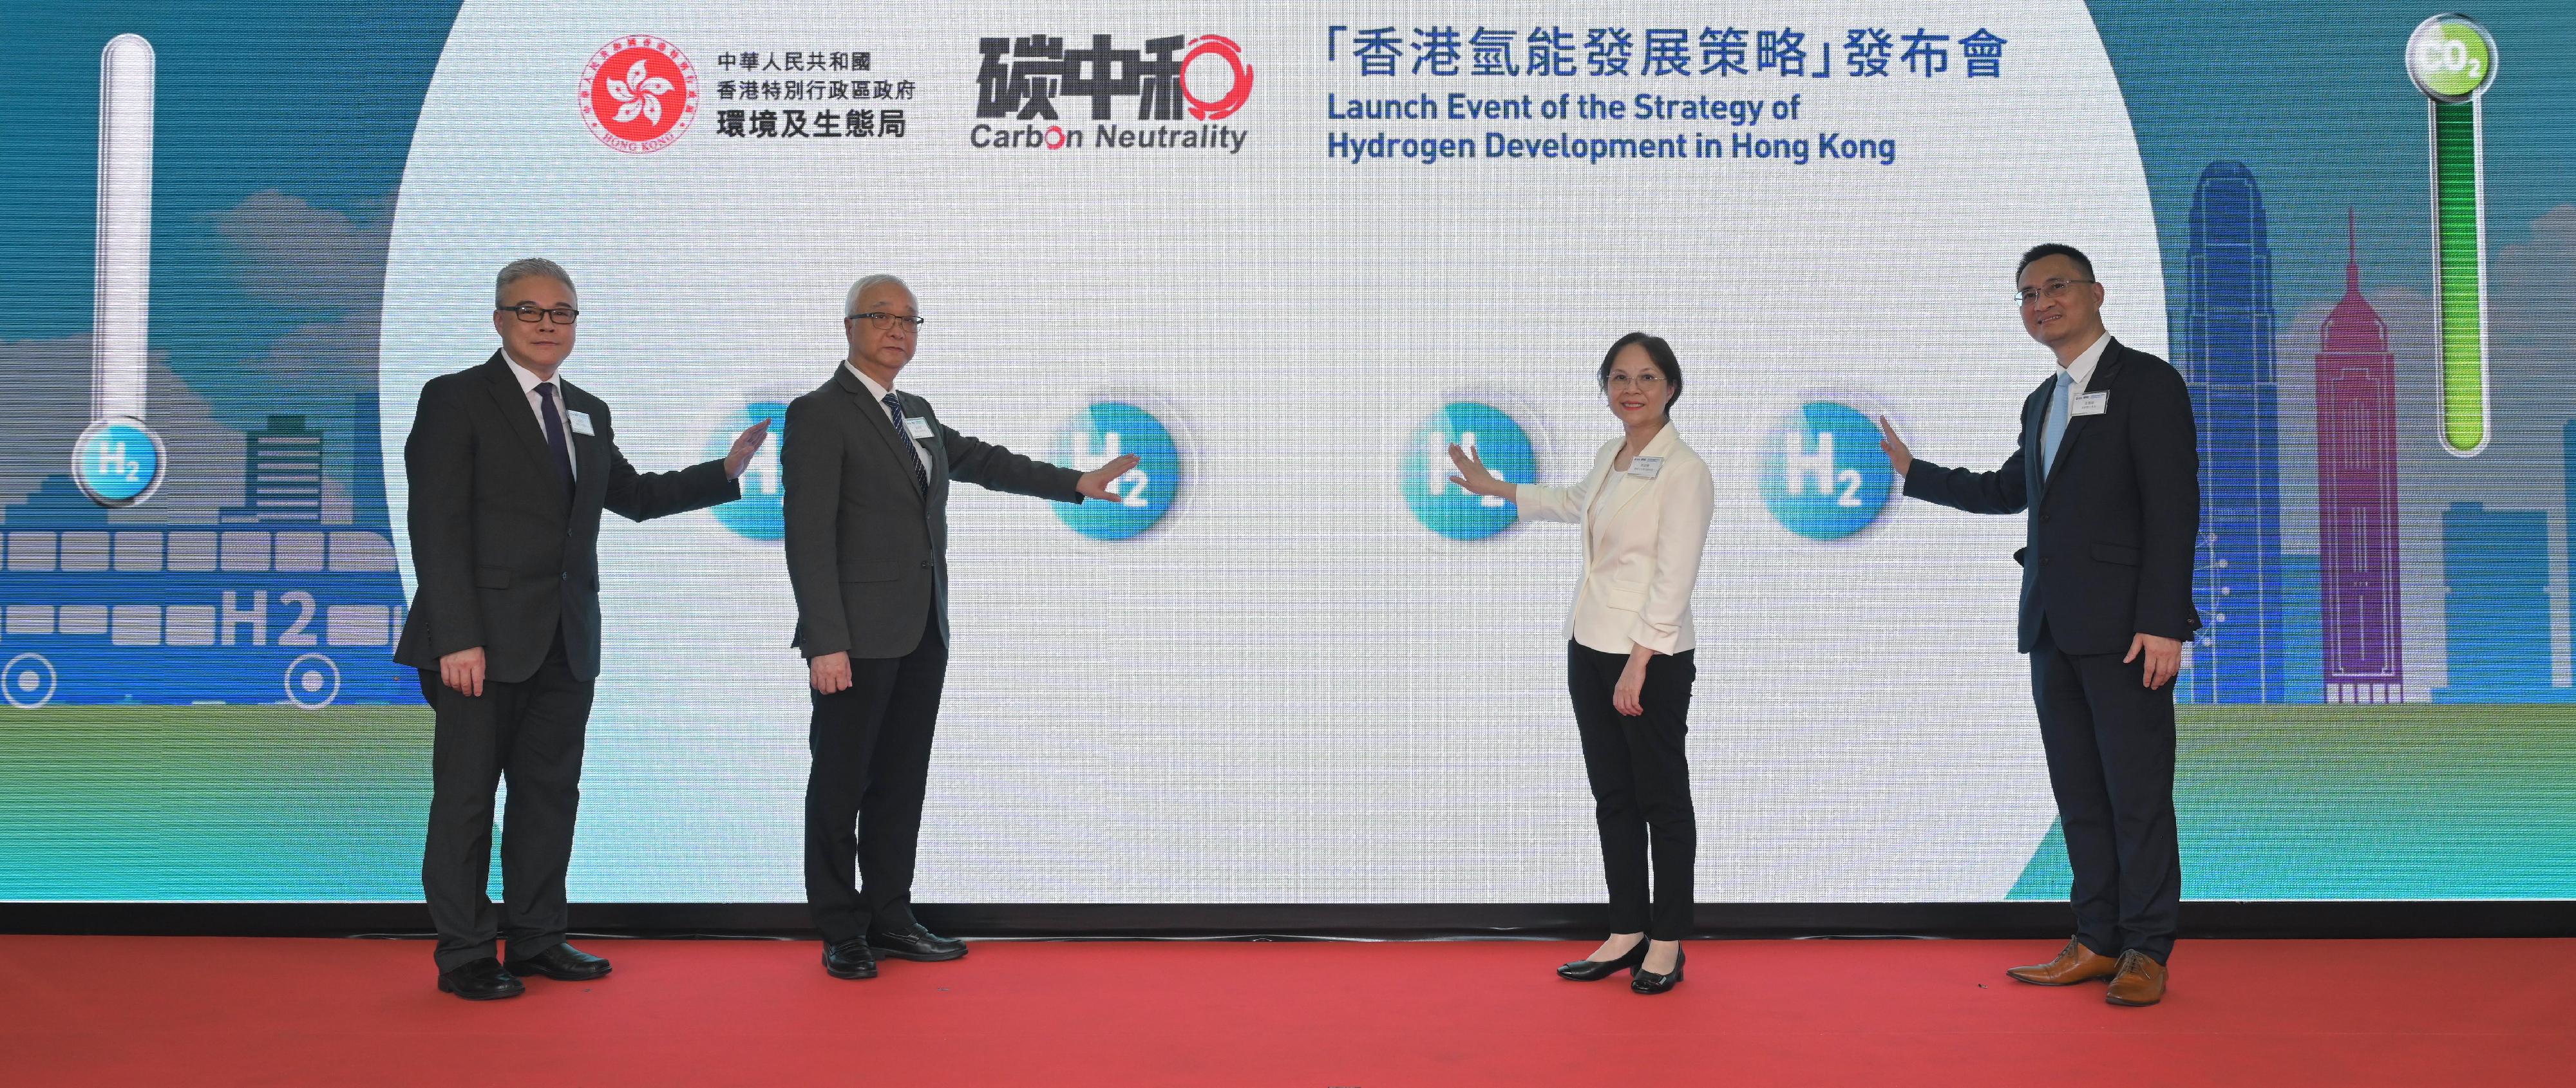 The Government today (June 17) announced the Strategy of Hydrogen Development in Hong Kong. Photo shows the Secretary for Environment and Ecology, Mr Tse Chin-wan (second left); the Under Secretary for Environment and Ecology, Miss Diane Wong (second right); the Commissioner for Climate Change, Mr Wong Chuen-fai (first right); and the Director of Electrical and Mechanical Services, Mr Poon Kwok-ying (first left) officiating at the launching ceremony.